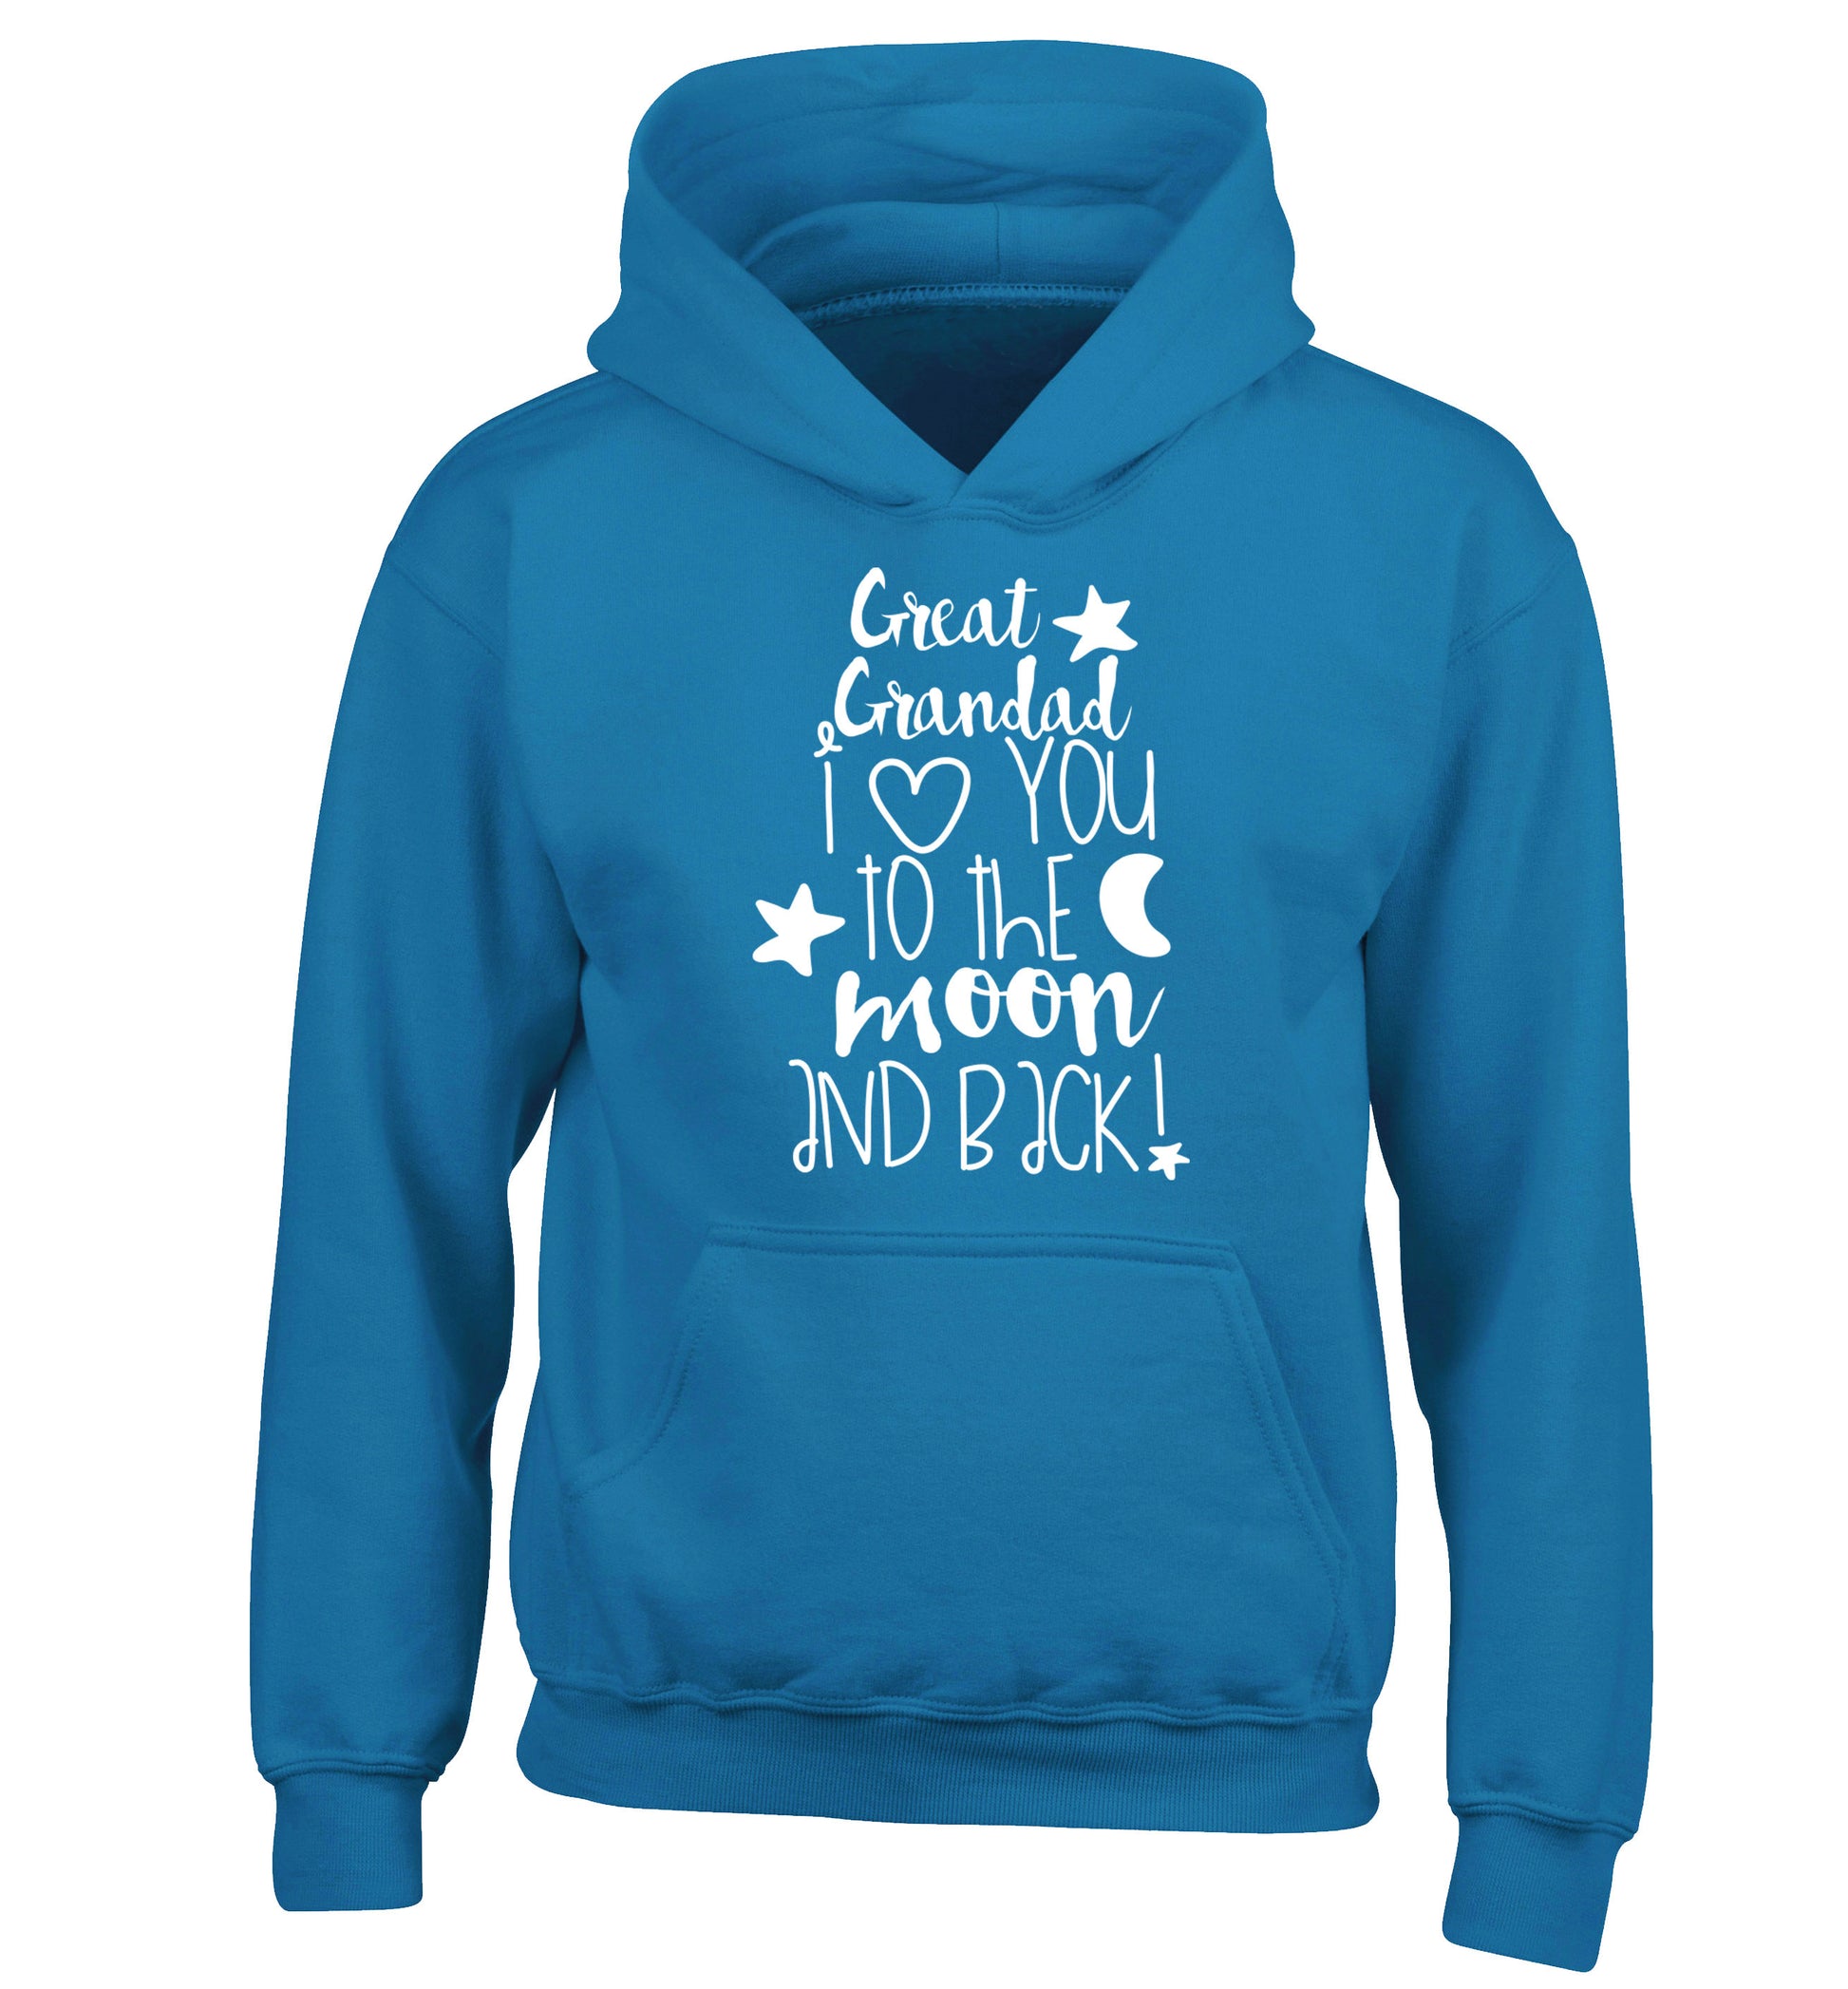 Great Grandad I love you to the moon and back children's blue hoodie 12-14 Years